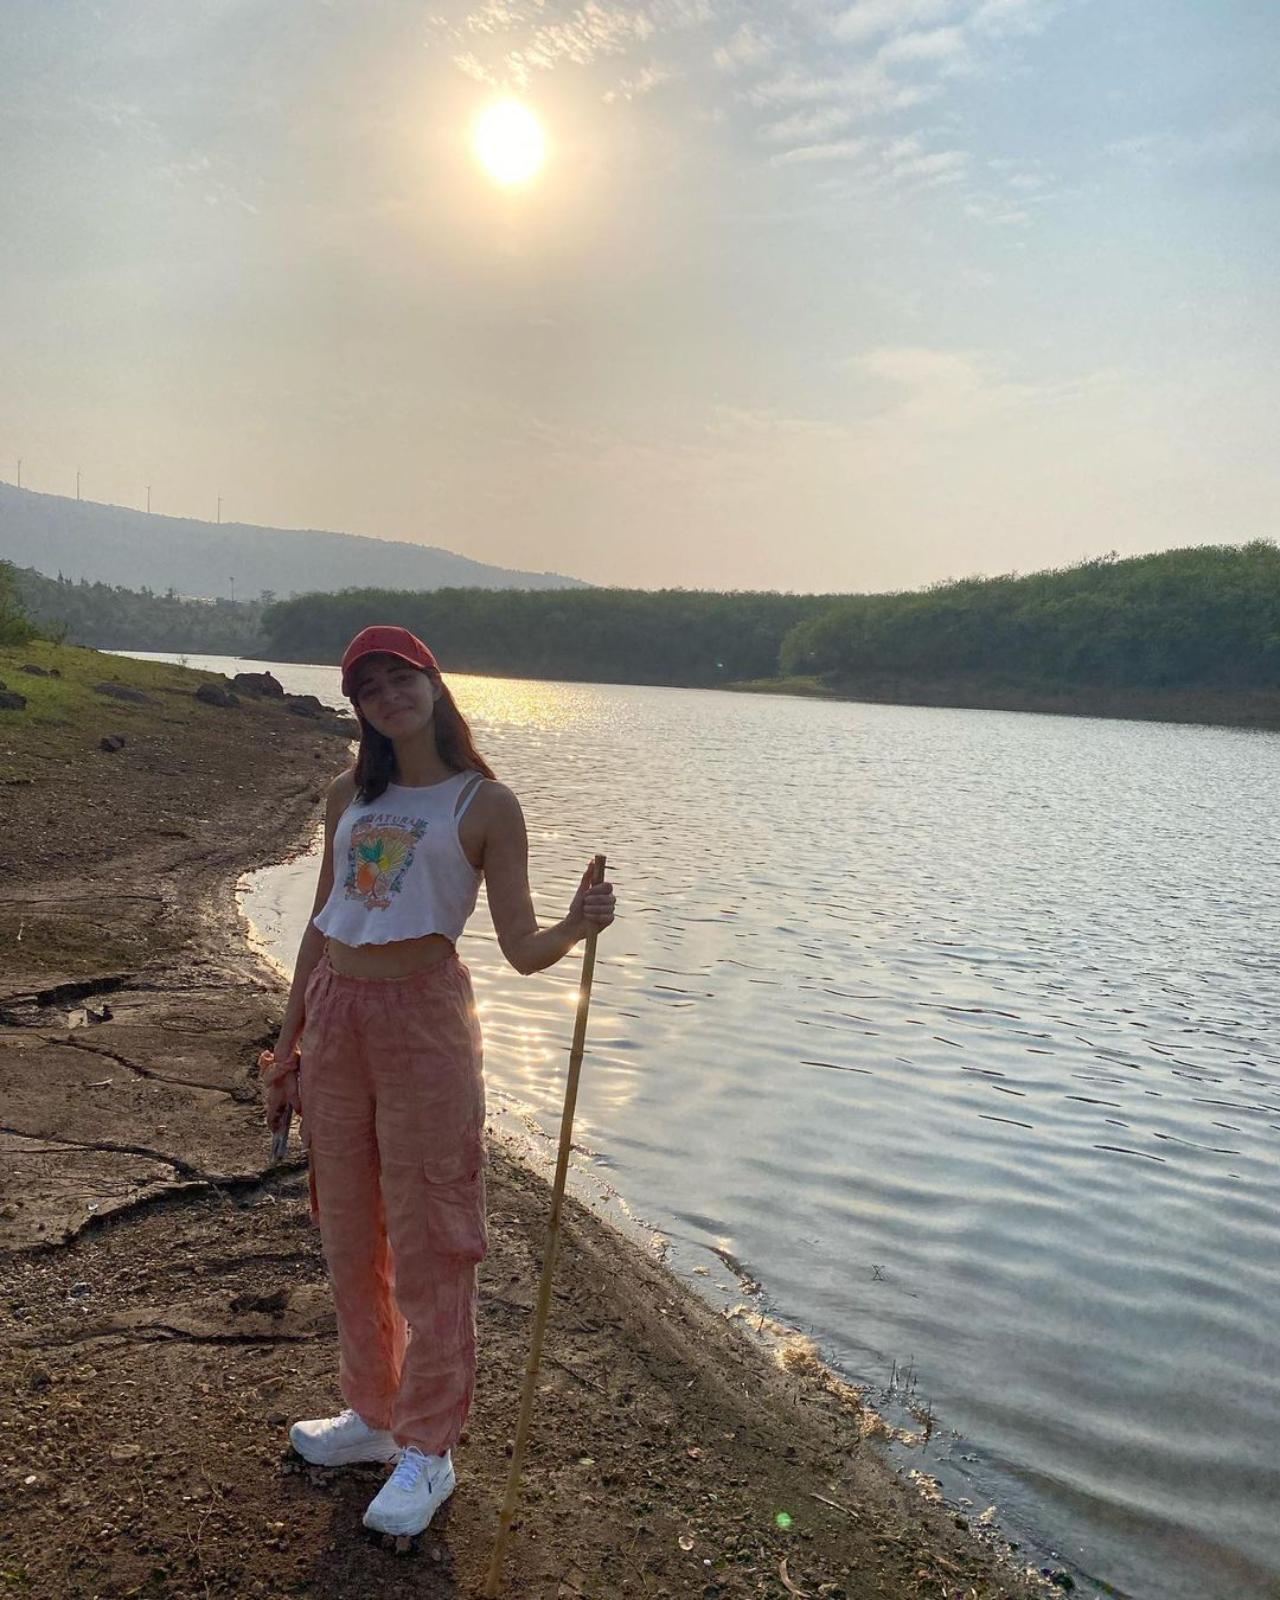 In the first picture, Ananya could be seen standing near a lake dressed in a casual outfit and holding a stick